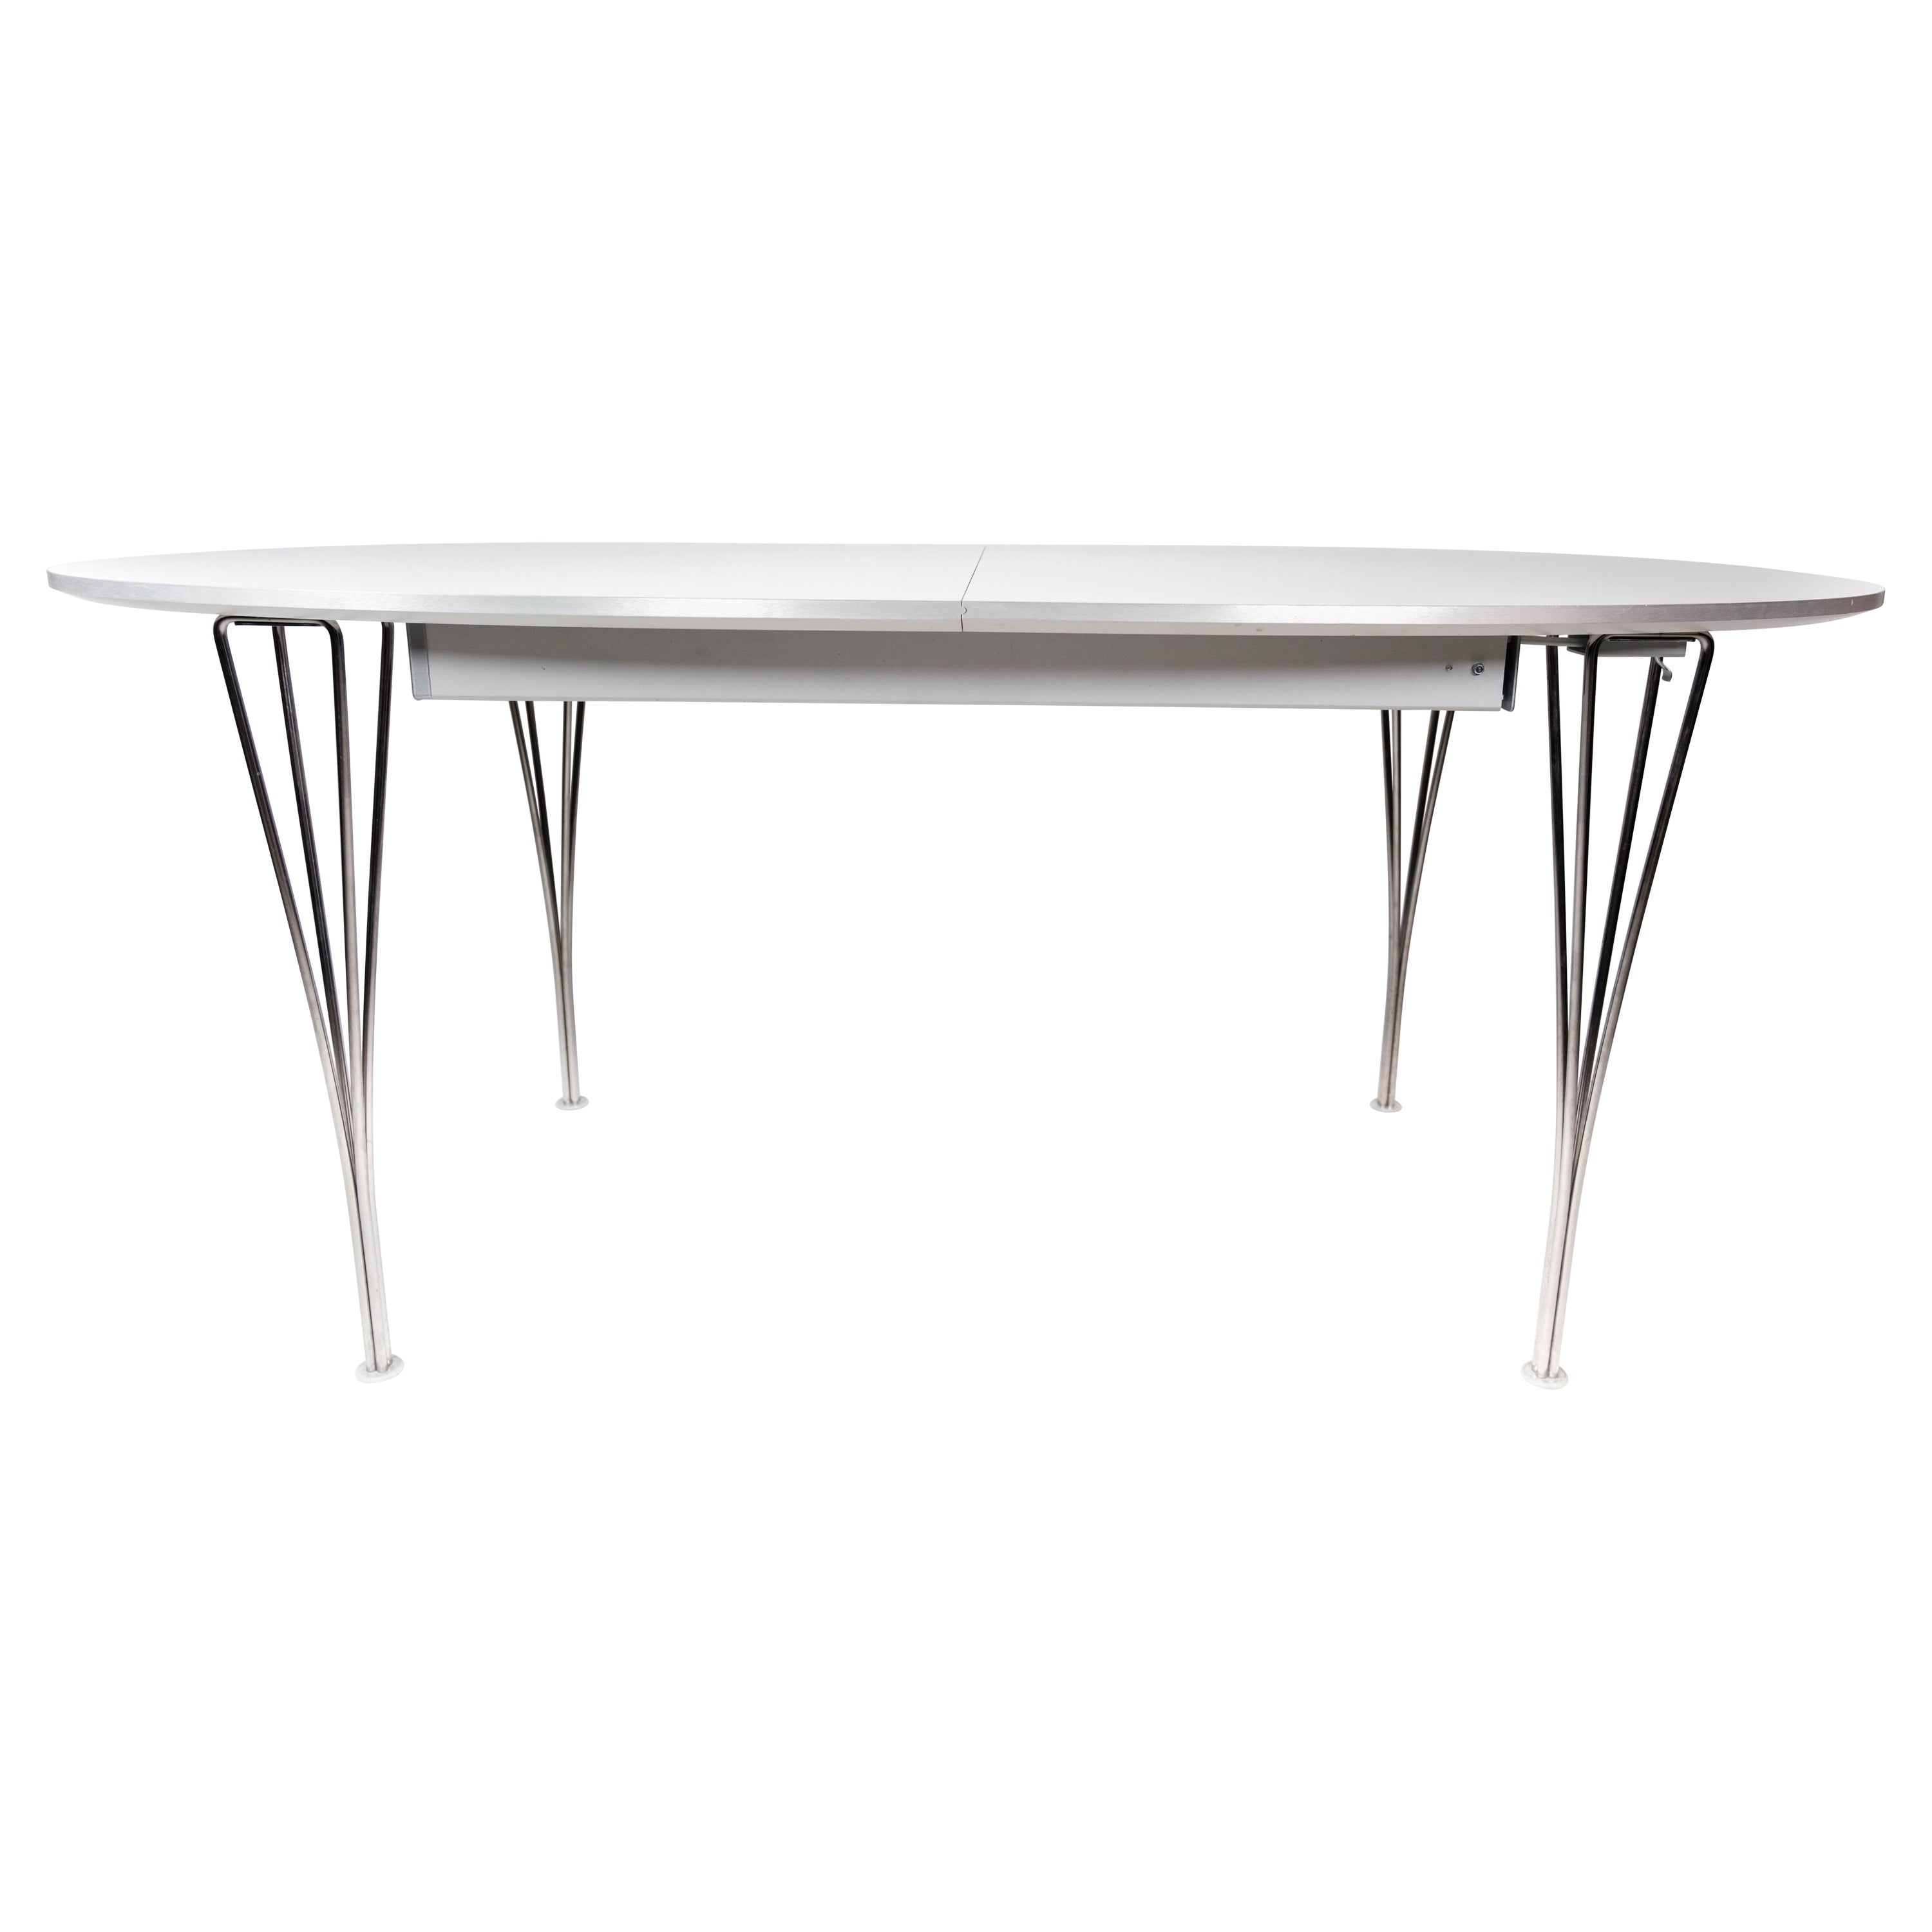 Super Ellipse Dining Table With White Laminate Designed By Piet Hein From 2011